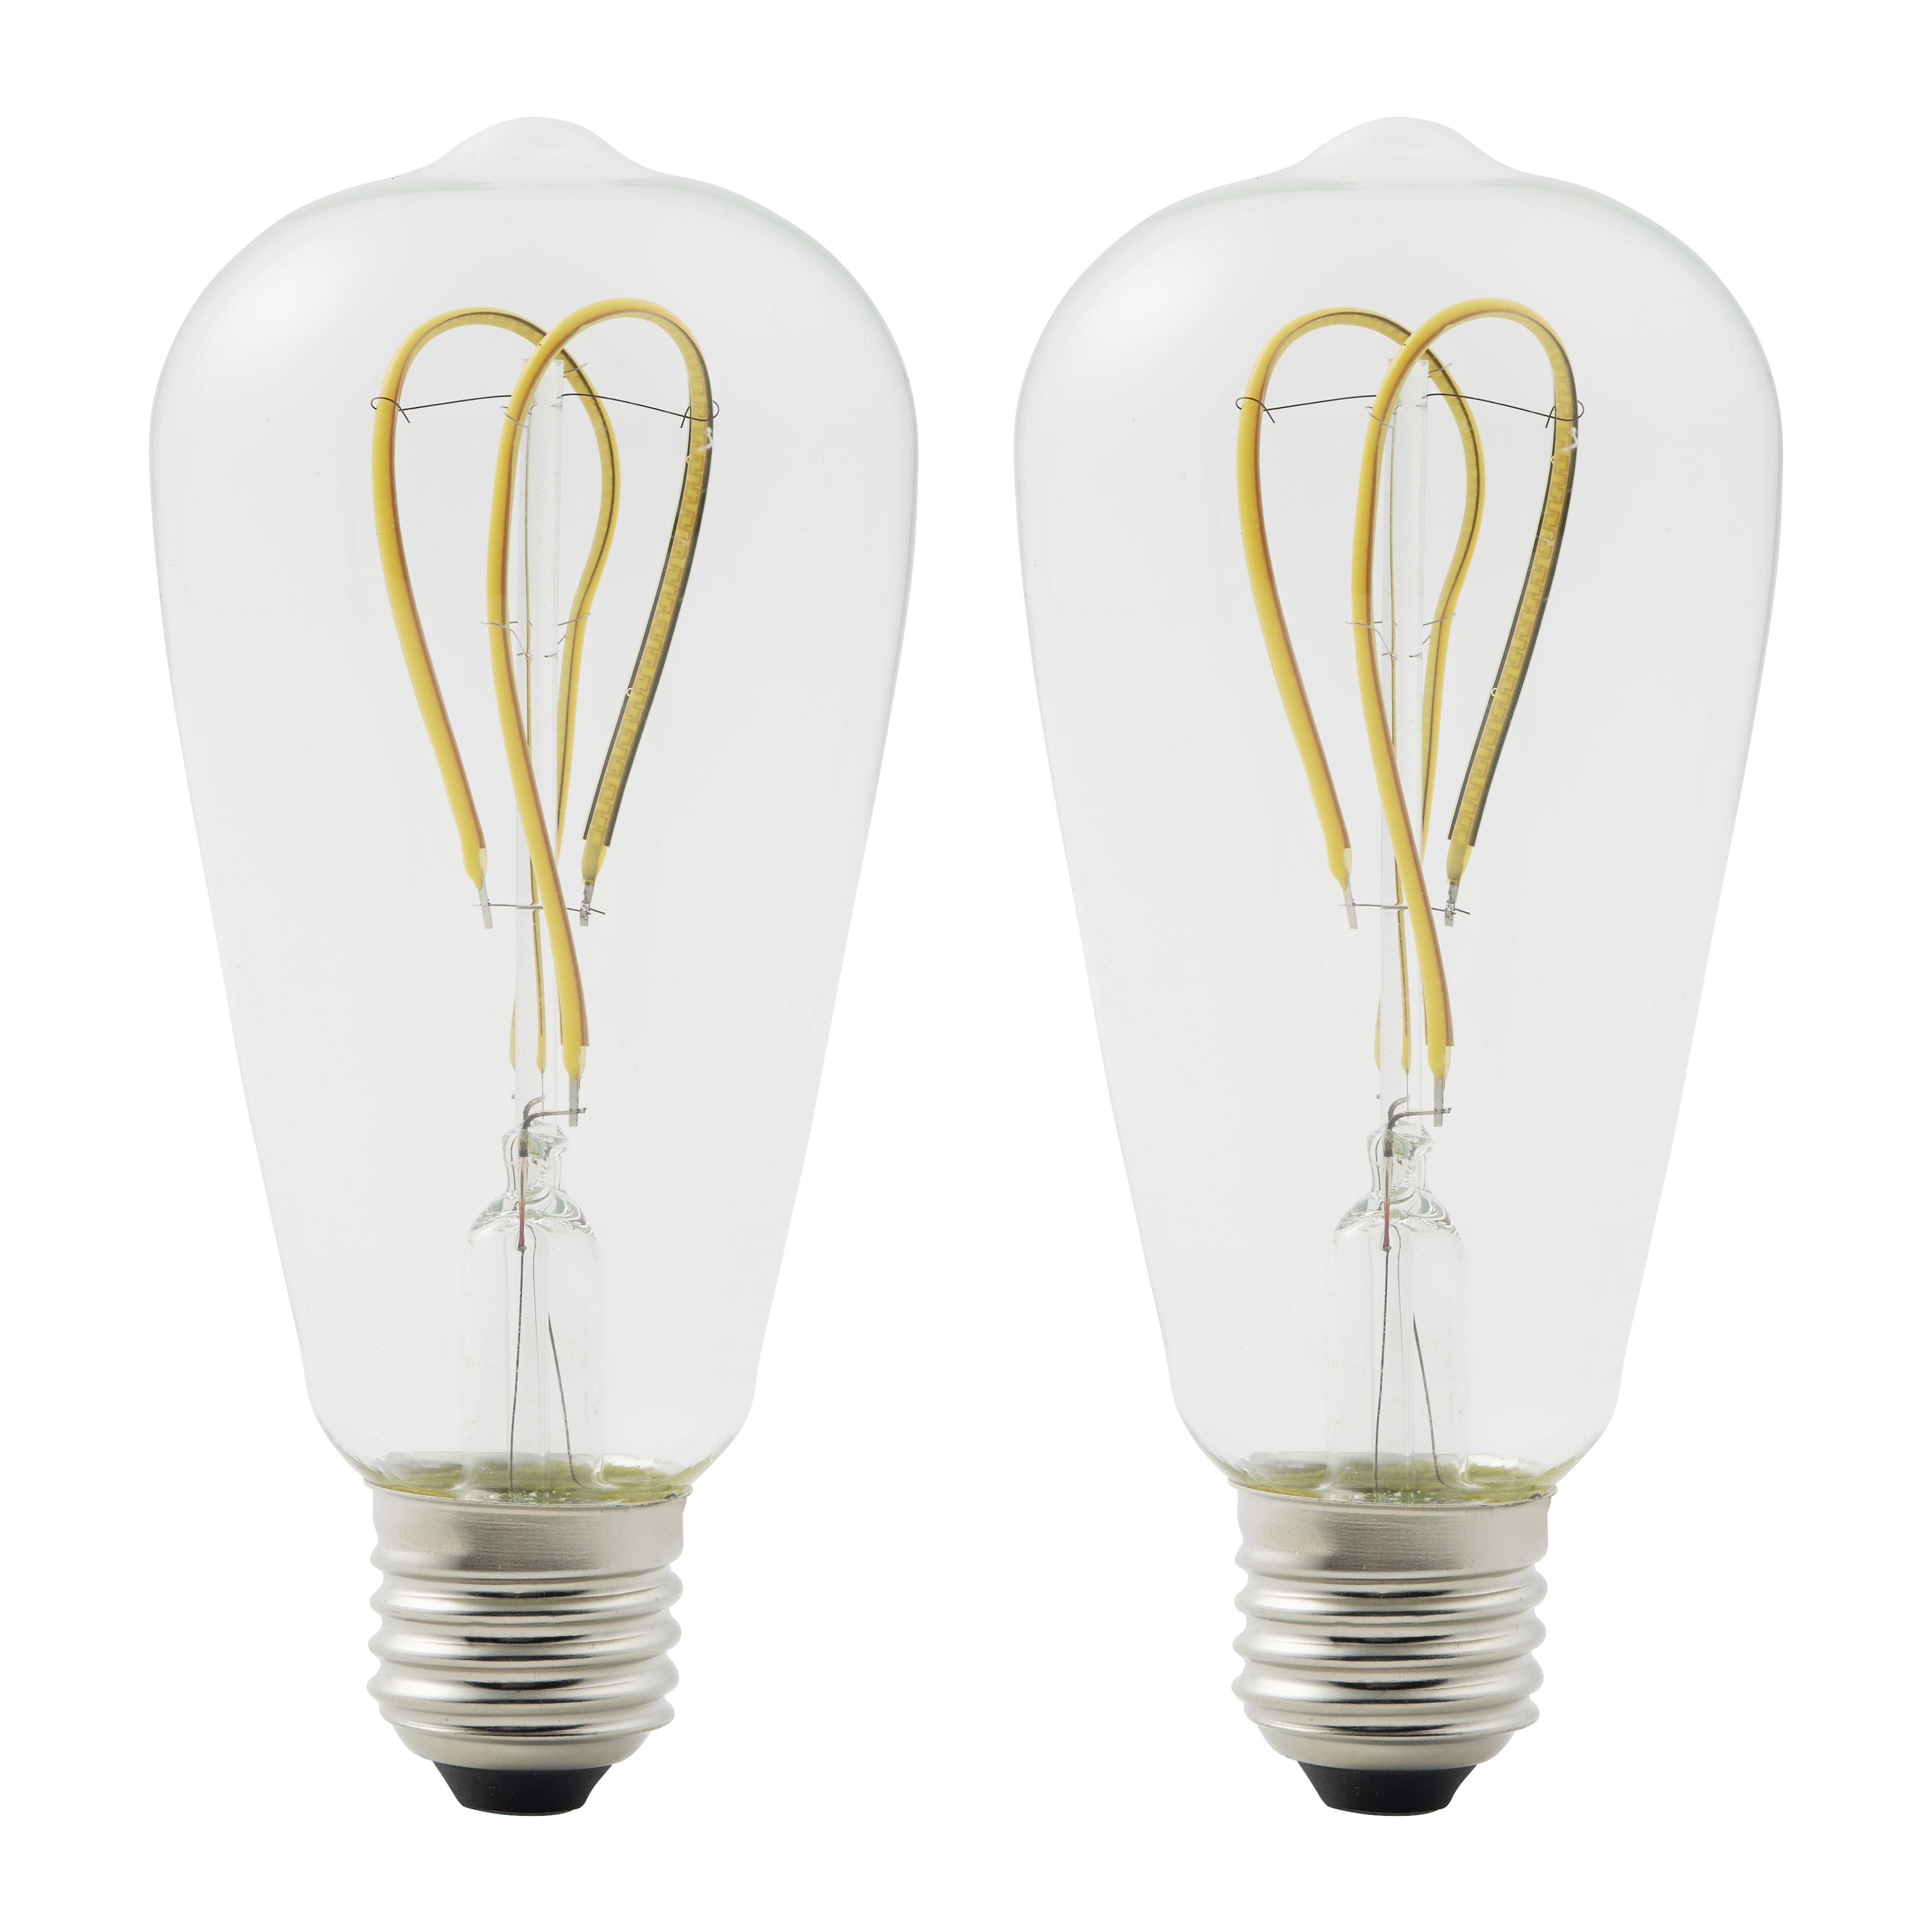 Diall E27 4W 470lm ST64 Warm white LED Filament Light bulb, Pack of 2